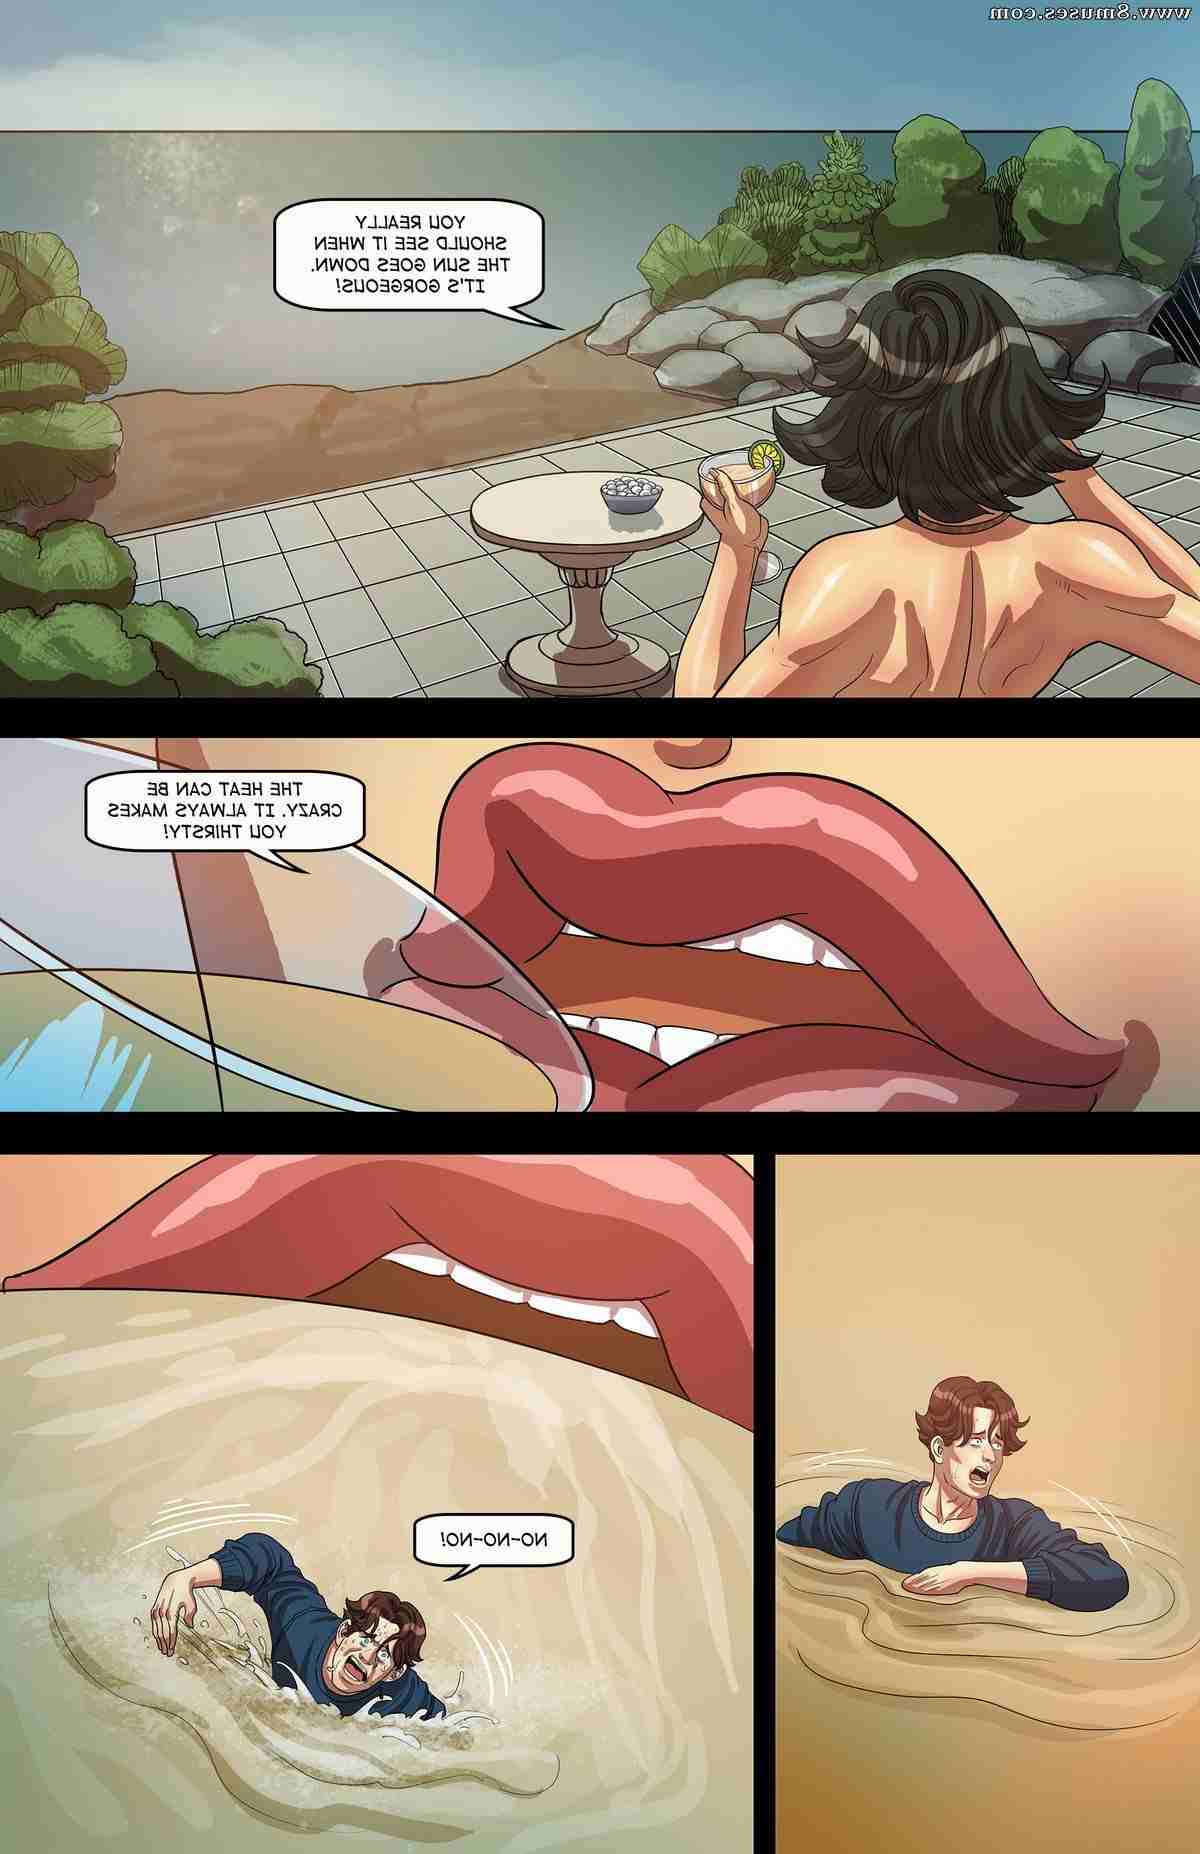 Giantess-Fan-Comics/The-Necklace The_Necklace__8muses_-_Sex_and_Porn_Comics_14.jpg